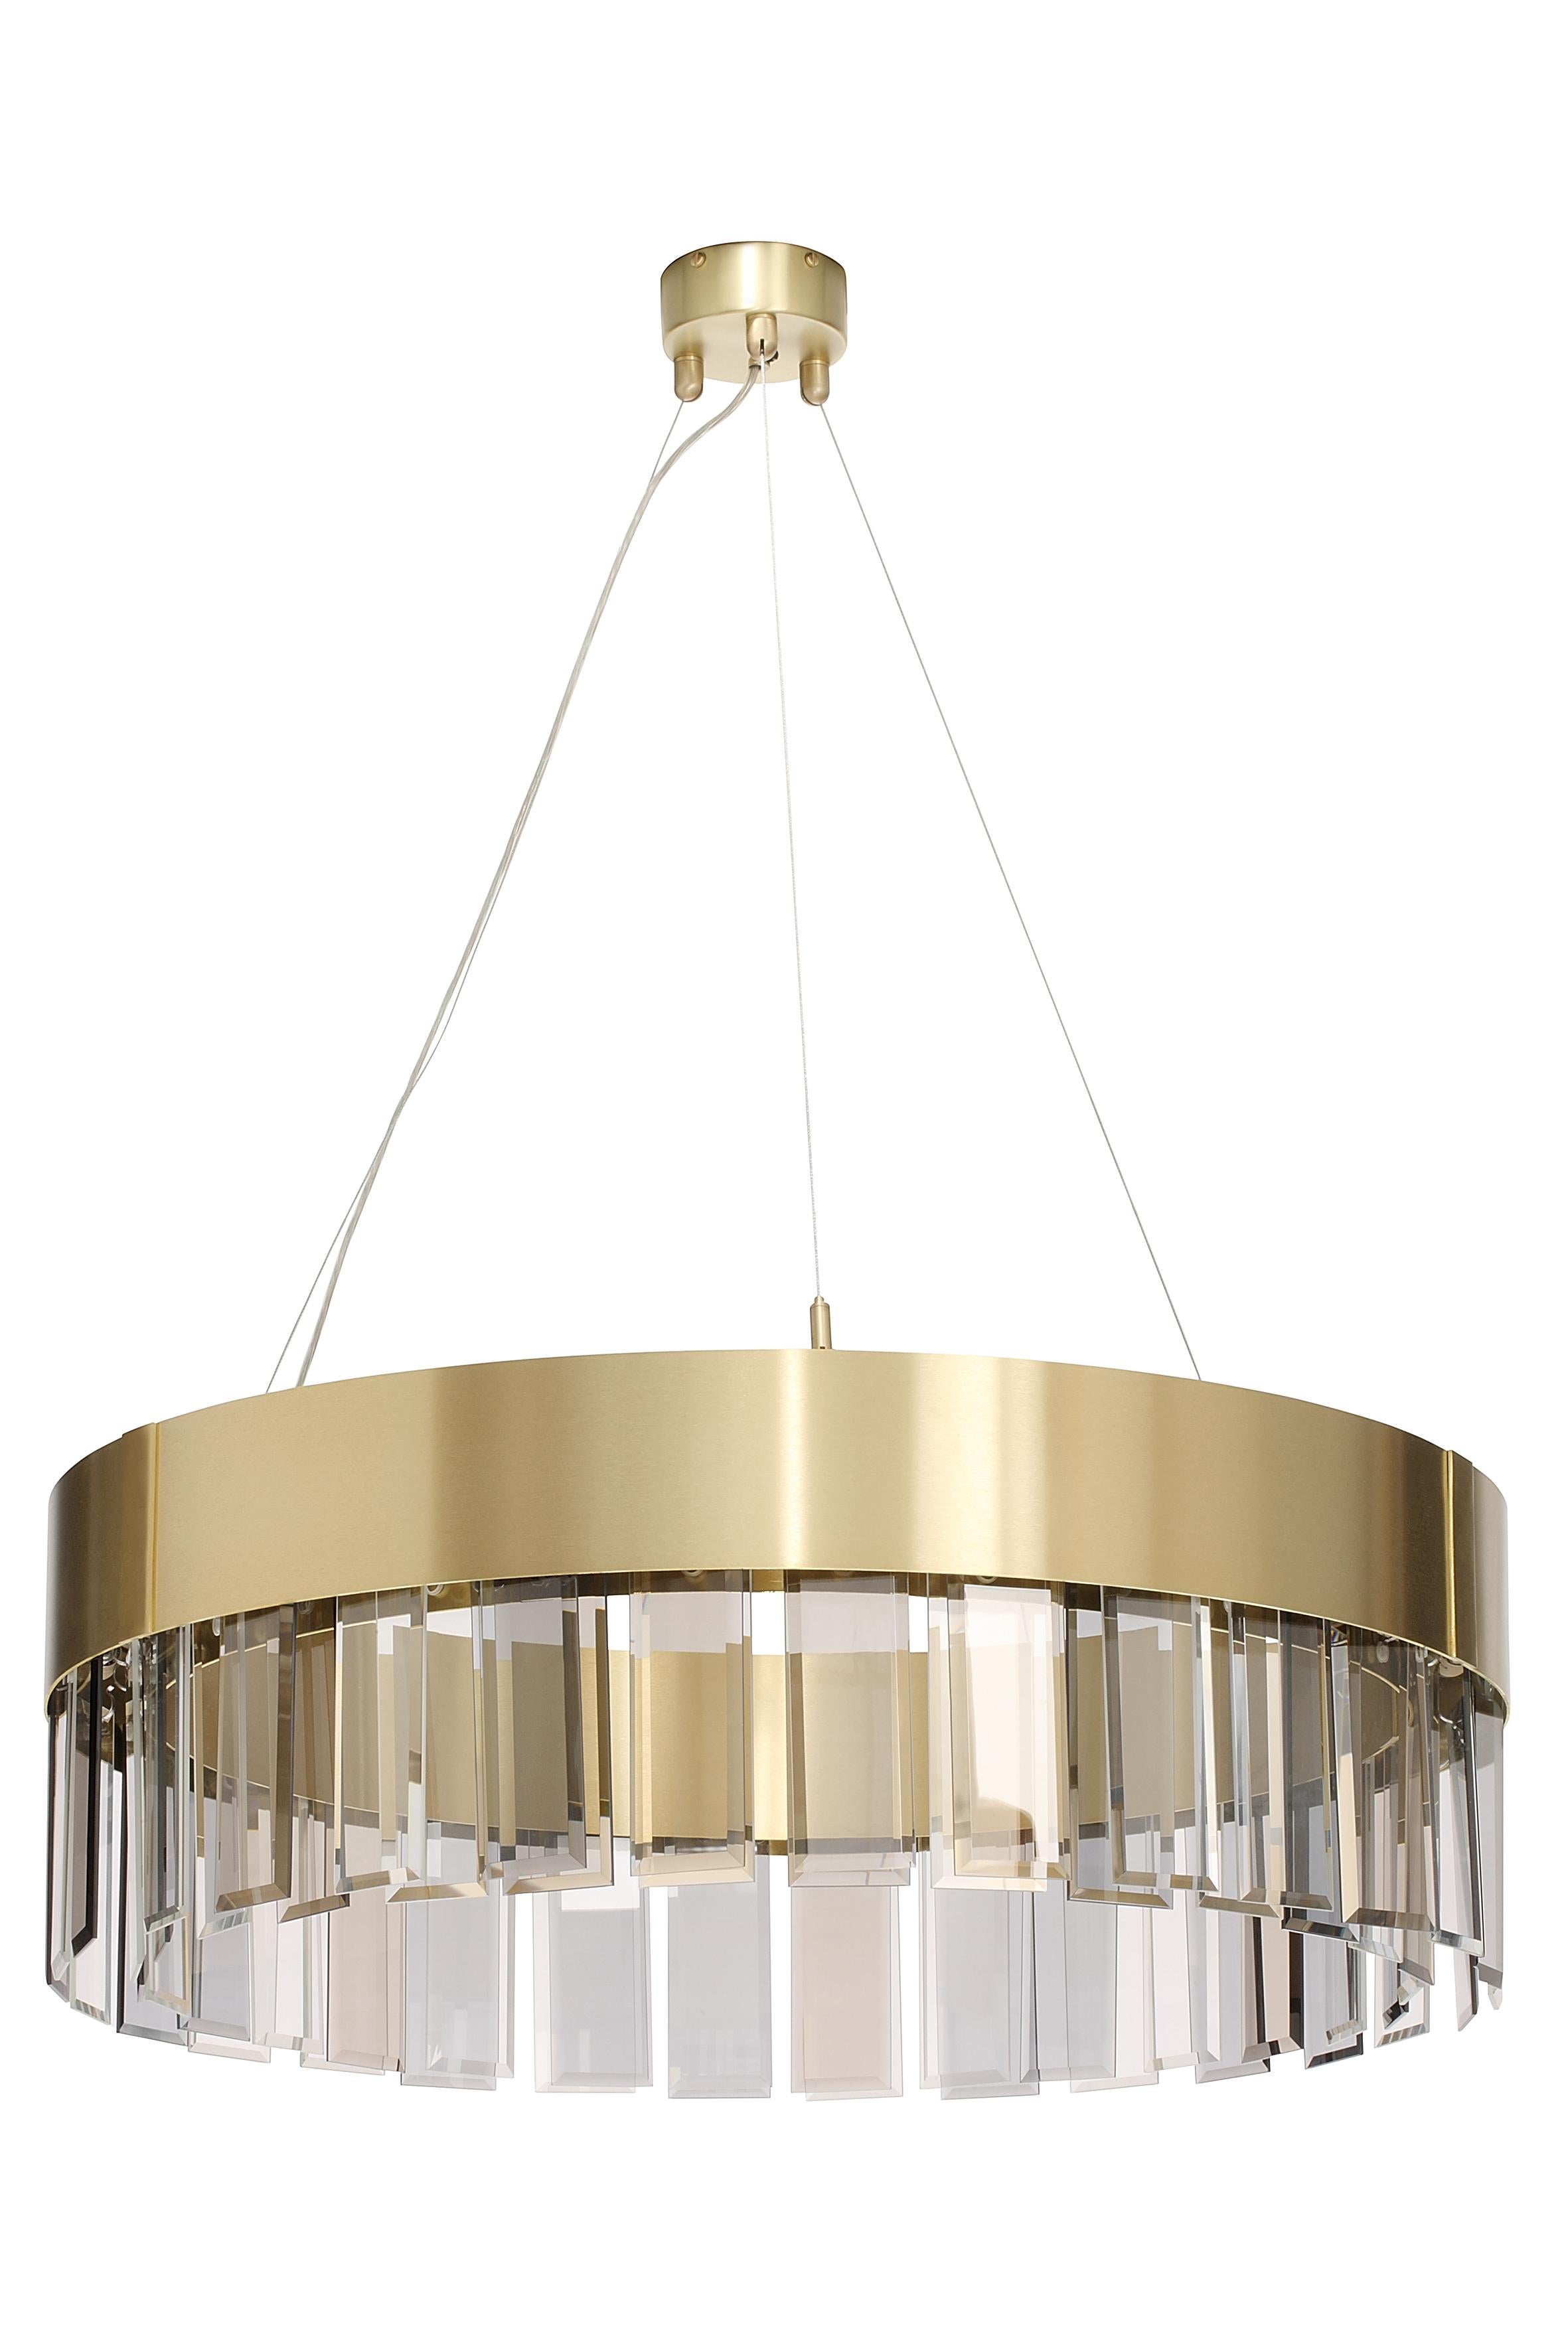 Solaris 700 pendant by CTO Lighting
Materials: satin brass with cut glass drops and stainless steel suspension wire/clear flex
Dimensions: H 25 x W 70 cm 

All our lamps can be wired according to each country. If sold to the USA it will be wired